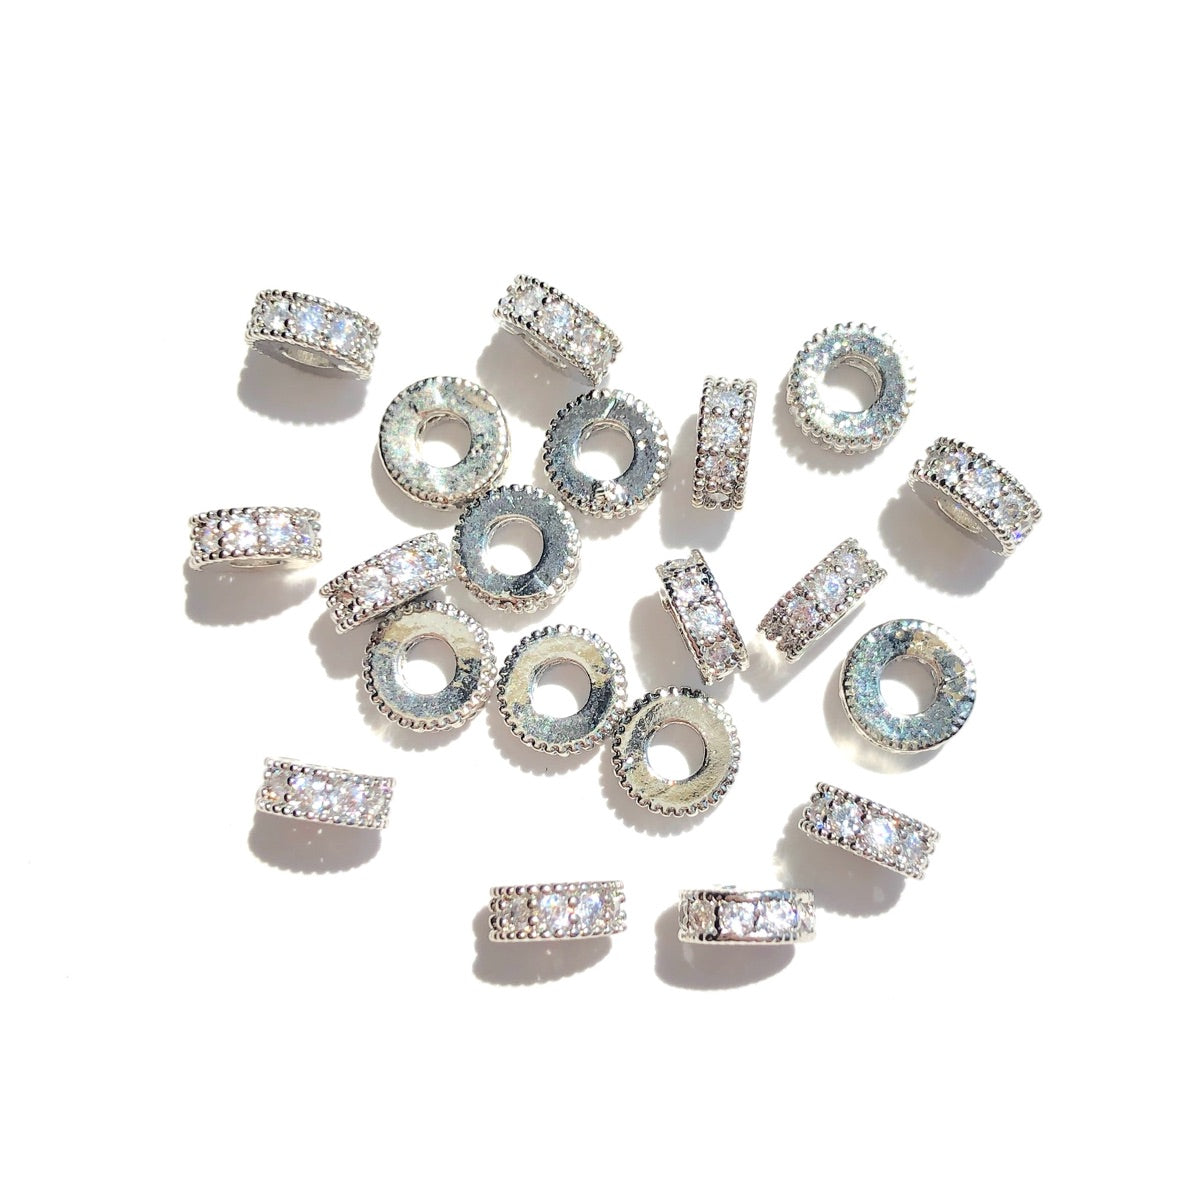 20-50pcs/lot 5.8*2.5mm CZ Paved Small Rondelle Wheel Spacers Silver CZ Paved Spacers New Spacers Arrivals Rondelle Beads Wholesale Charms Beads Beyond